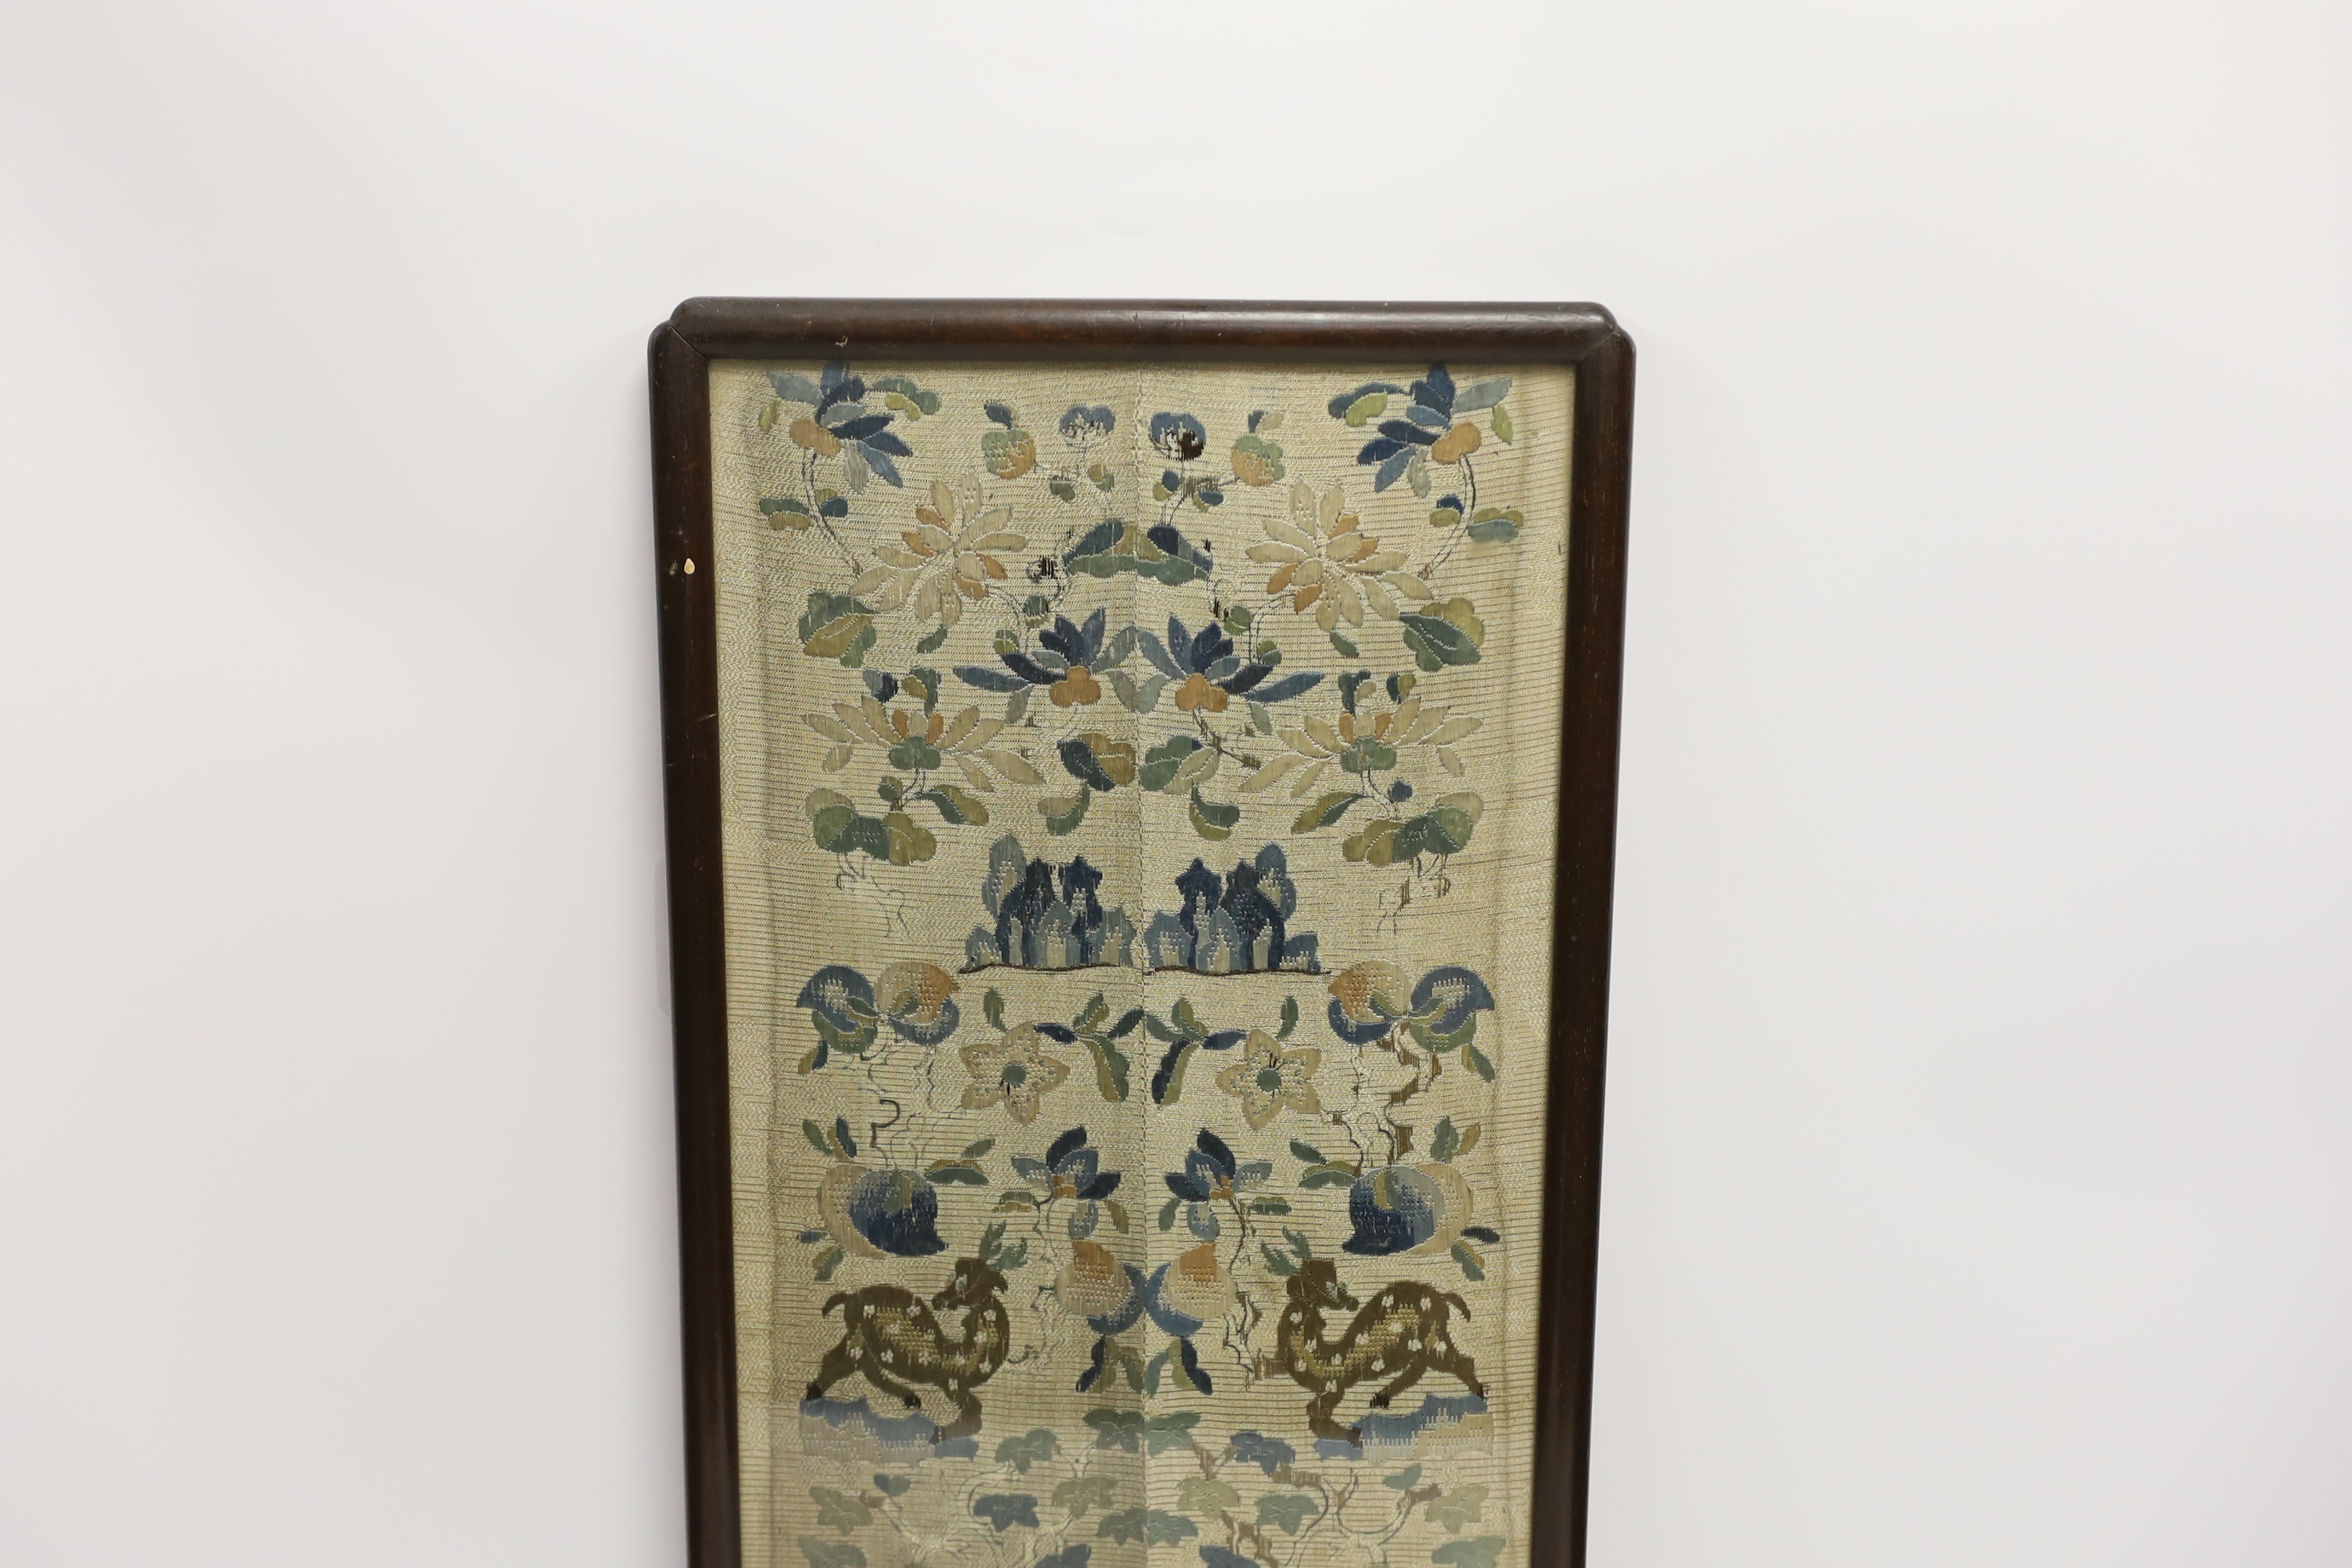 A framed pair of Chinese floral silk embroidered sleeve bands, embroidered with Chinese knot and stem stitch, 19cm wide x 50cm high